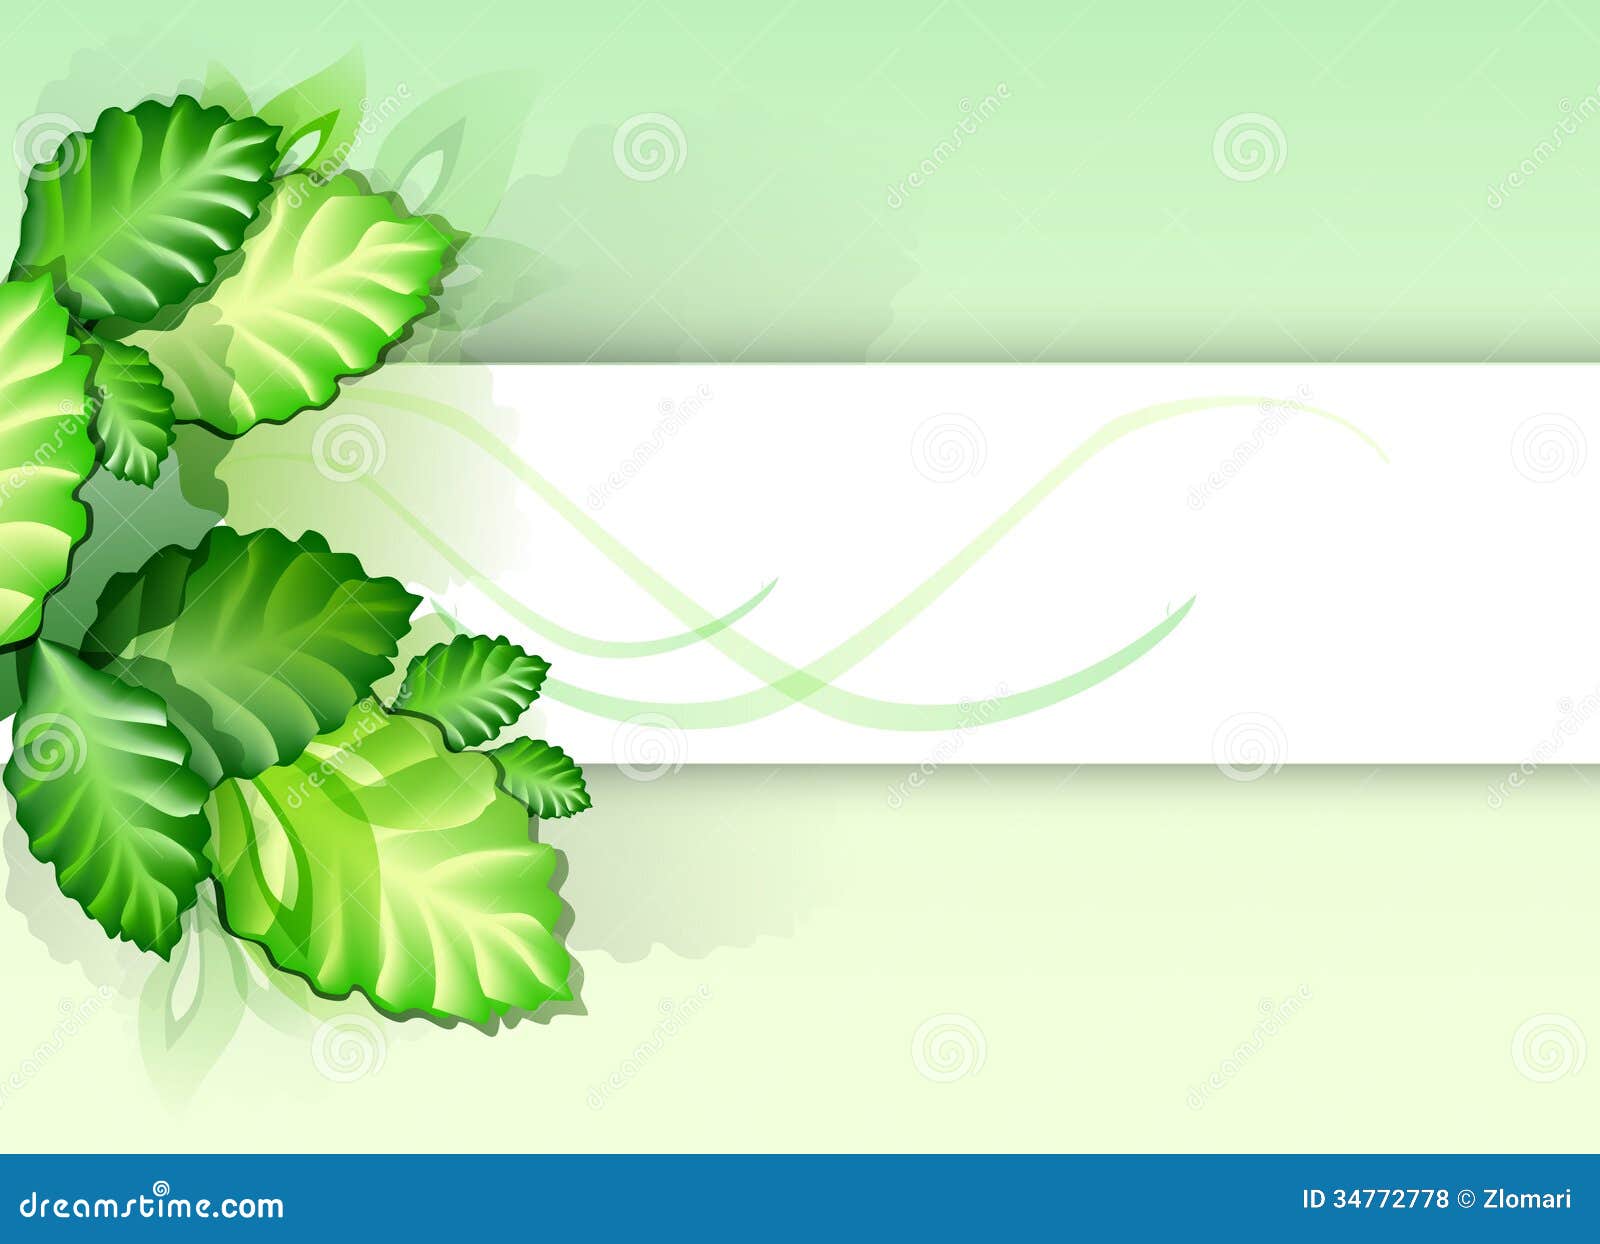 abstract background green leaves design leaf elements 34772778